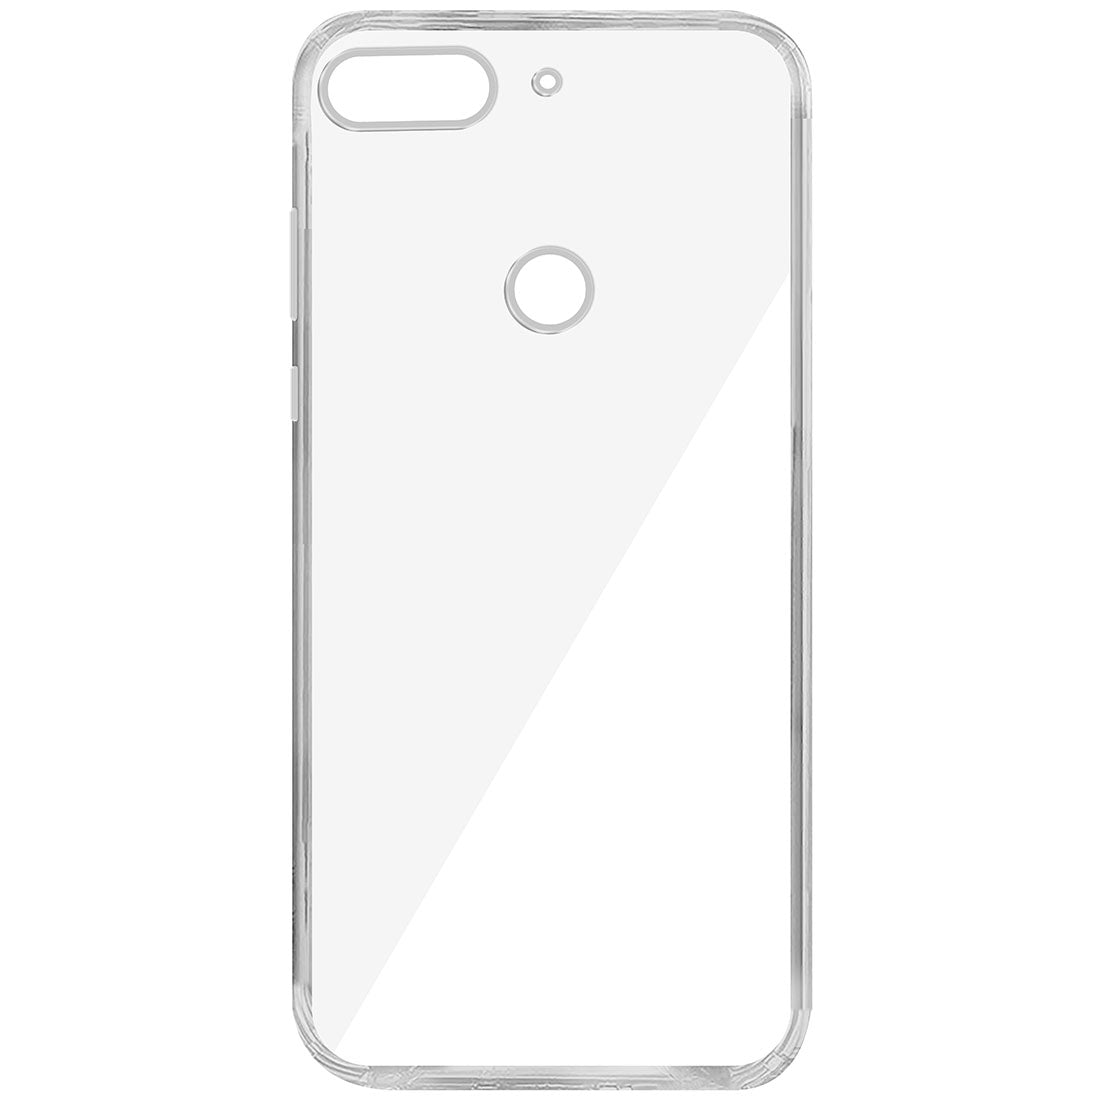 Clear Case for Lenovo K9 Note